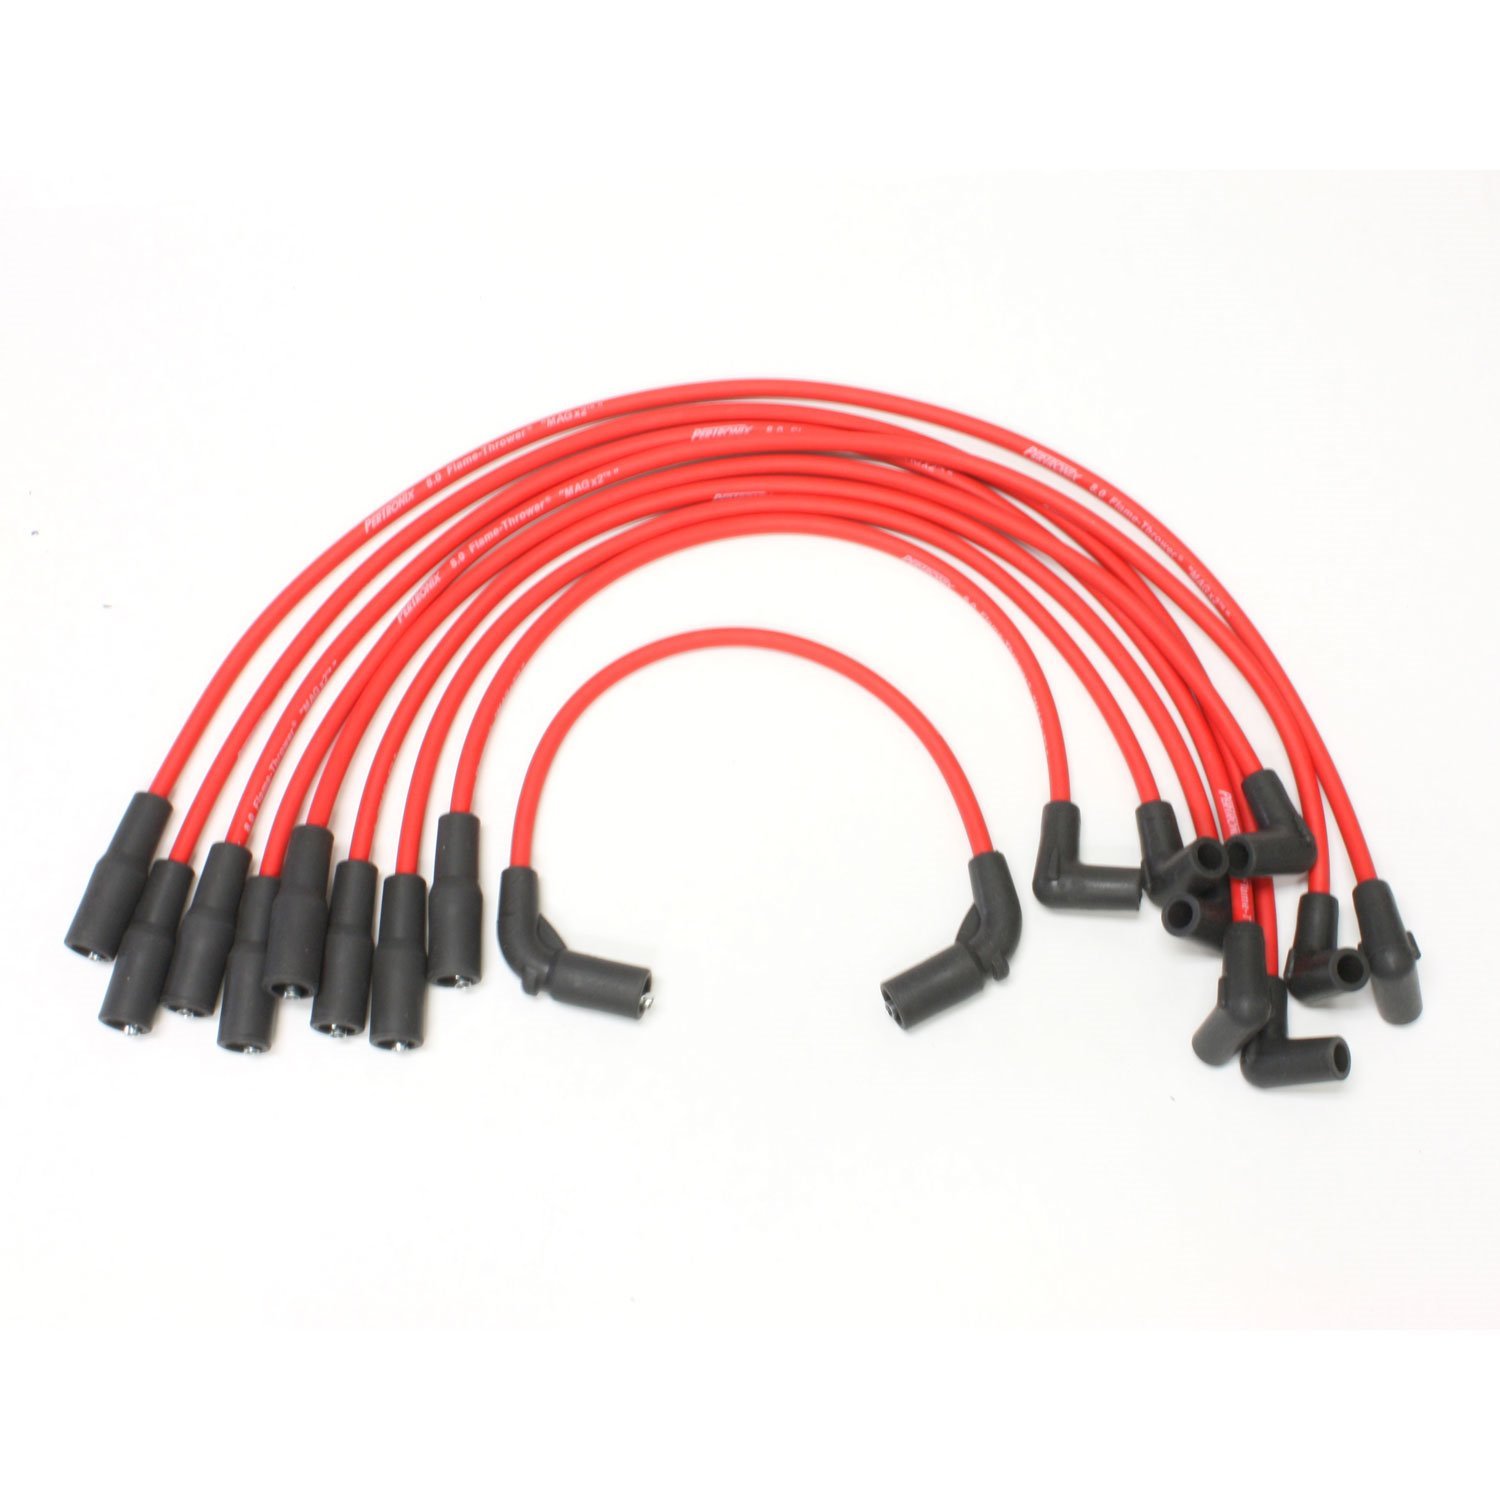 PerTronix 808424 Flame-Thrower Spark Plug Wires 8 cyl GM Custom Fit Red